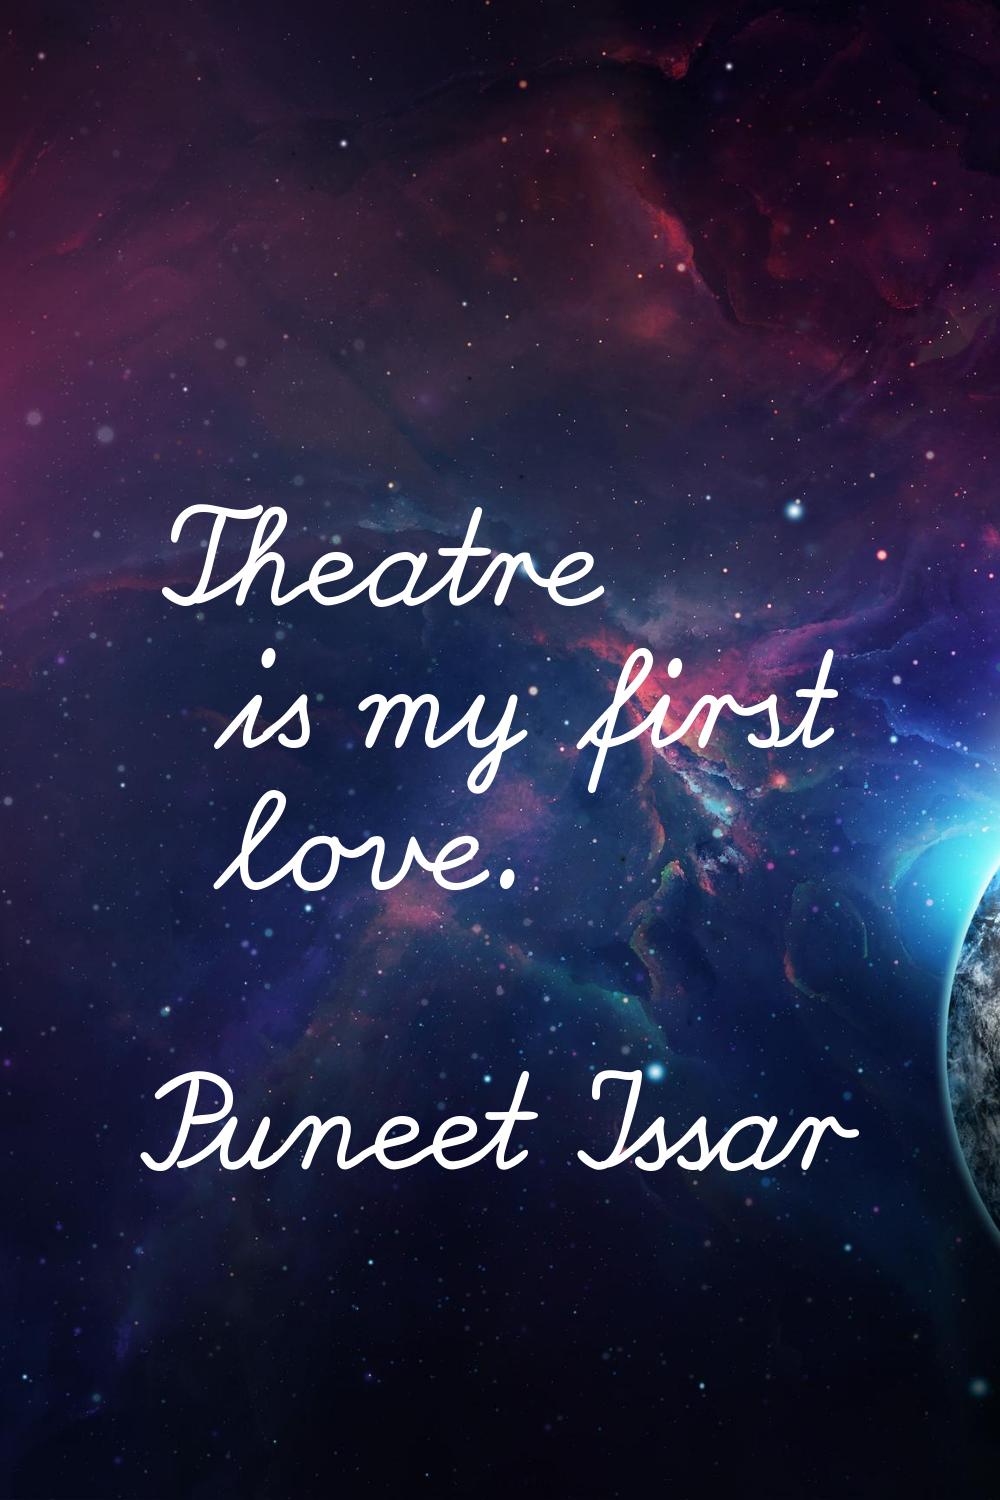 Theatre is my first love.